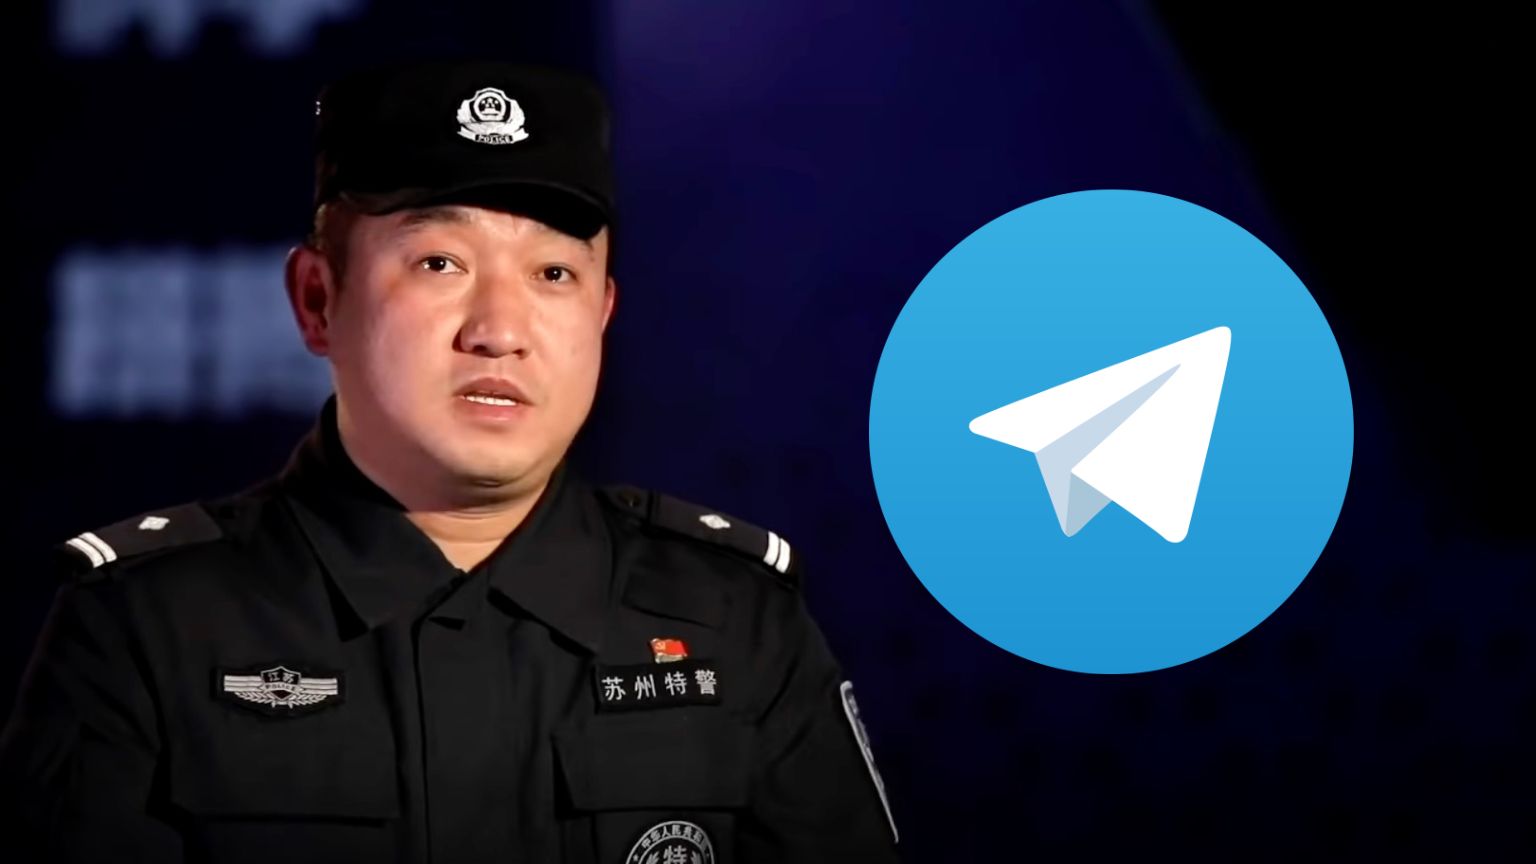 China Has Told Parents To Report Their Children To The Police If They Use Telegram Or WhatsApp